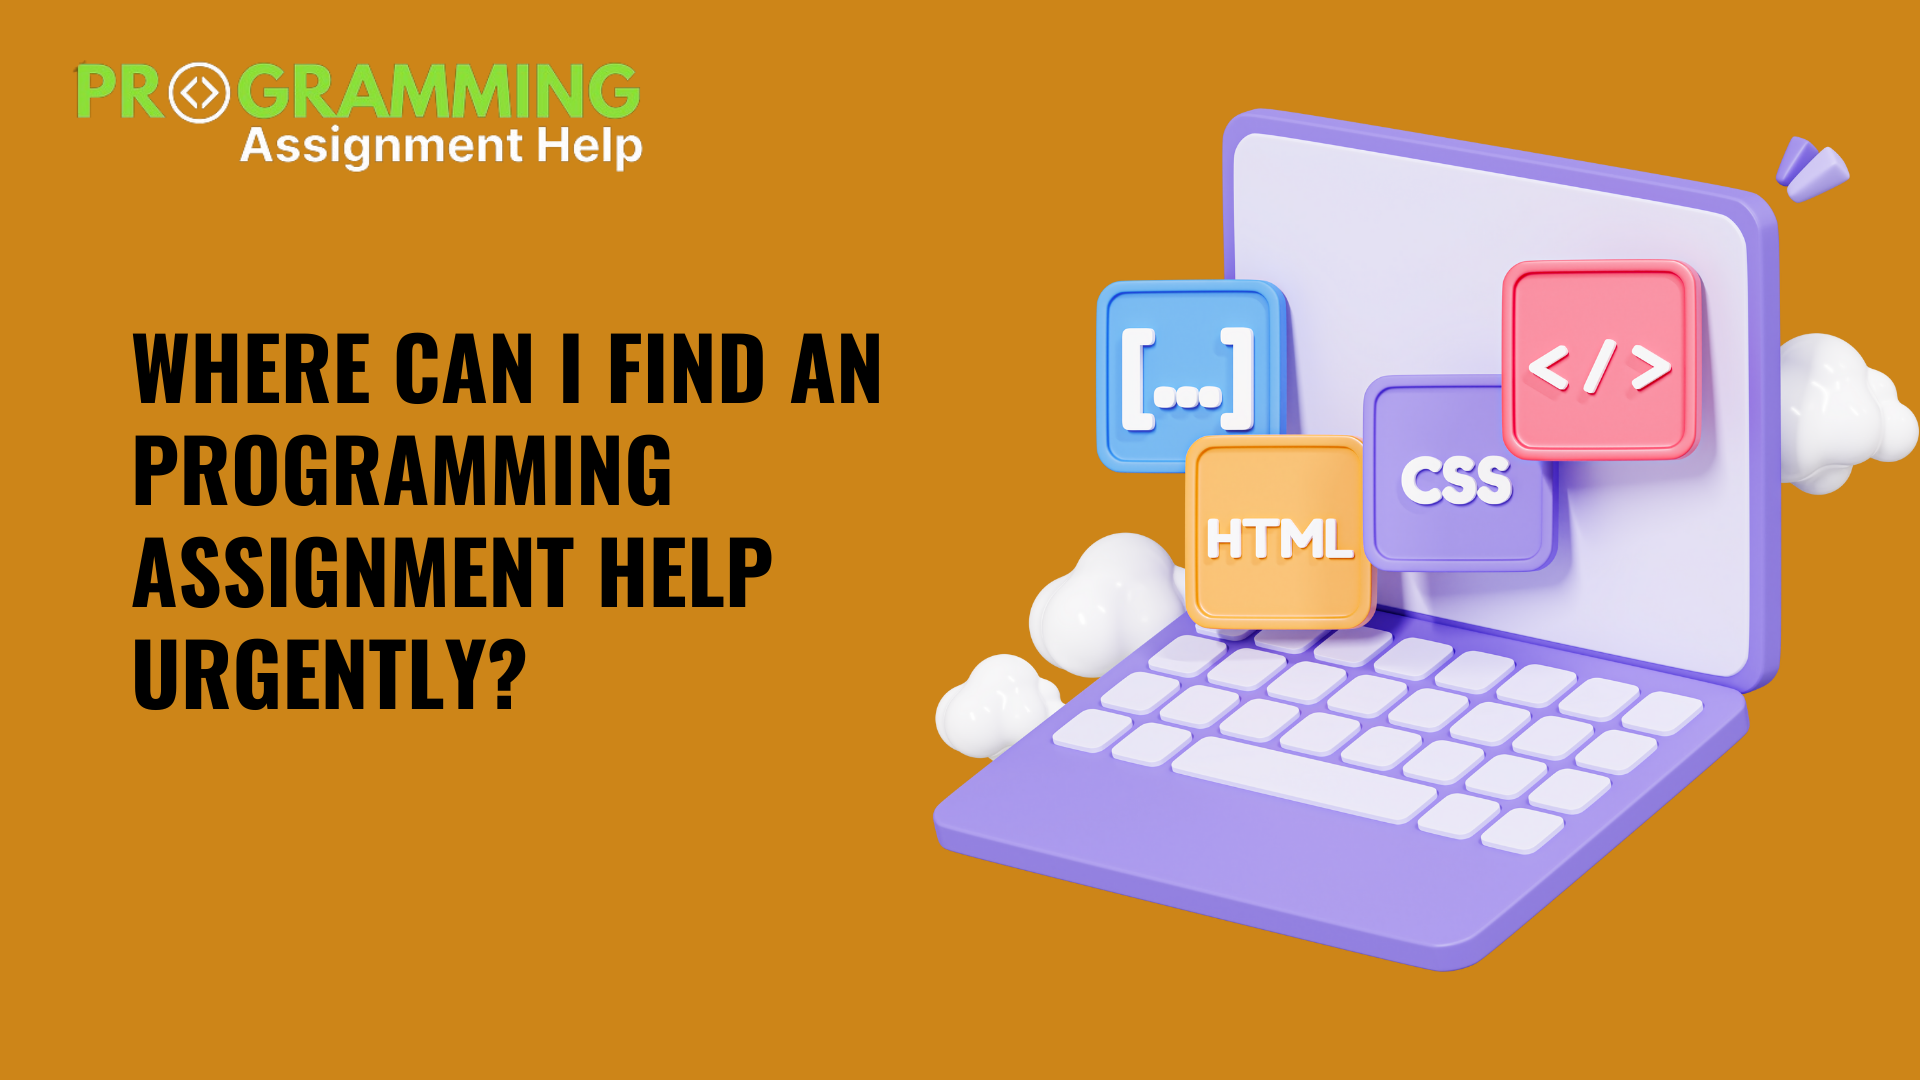 Where Can I Find An Programming Assignment Help Urgently?